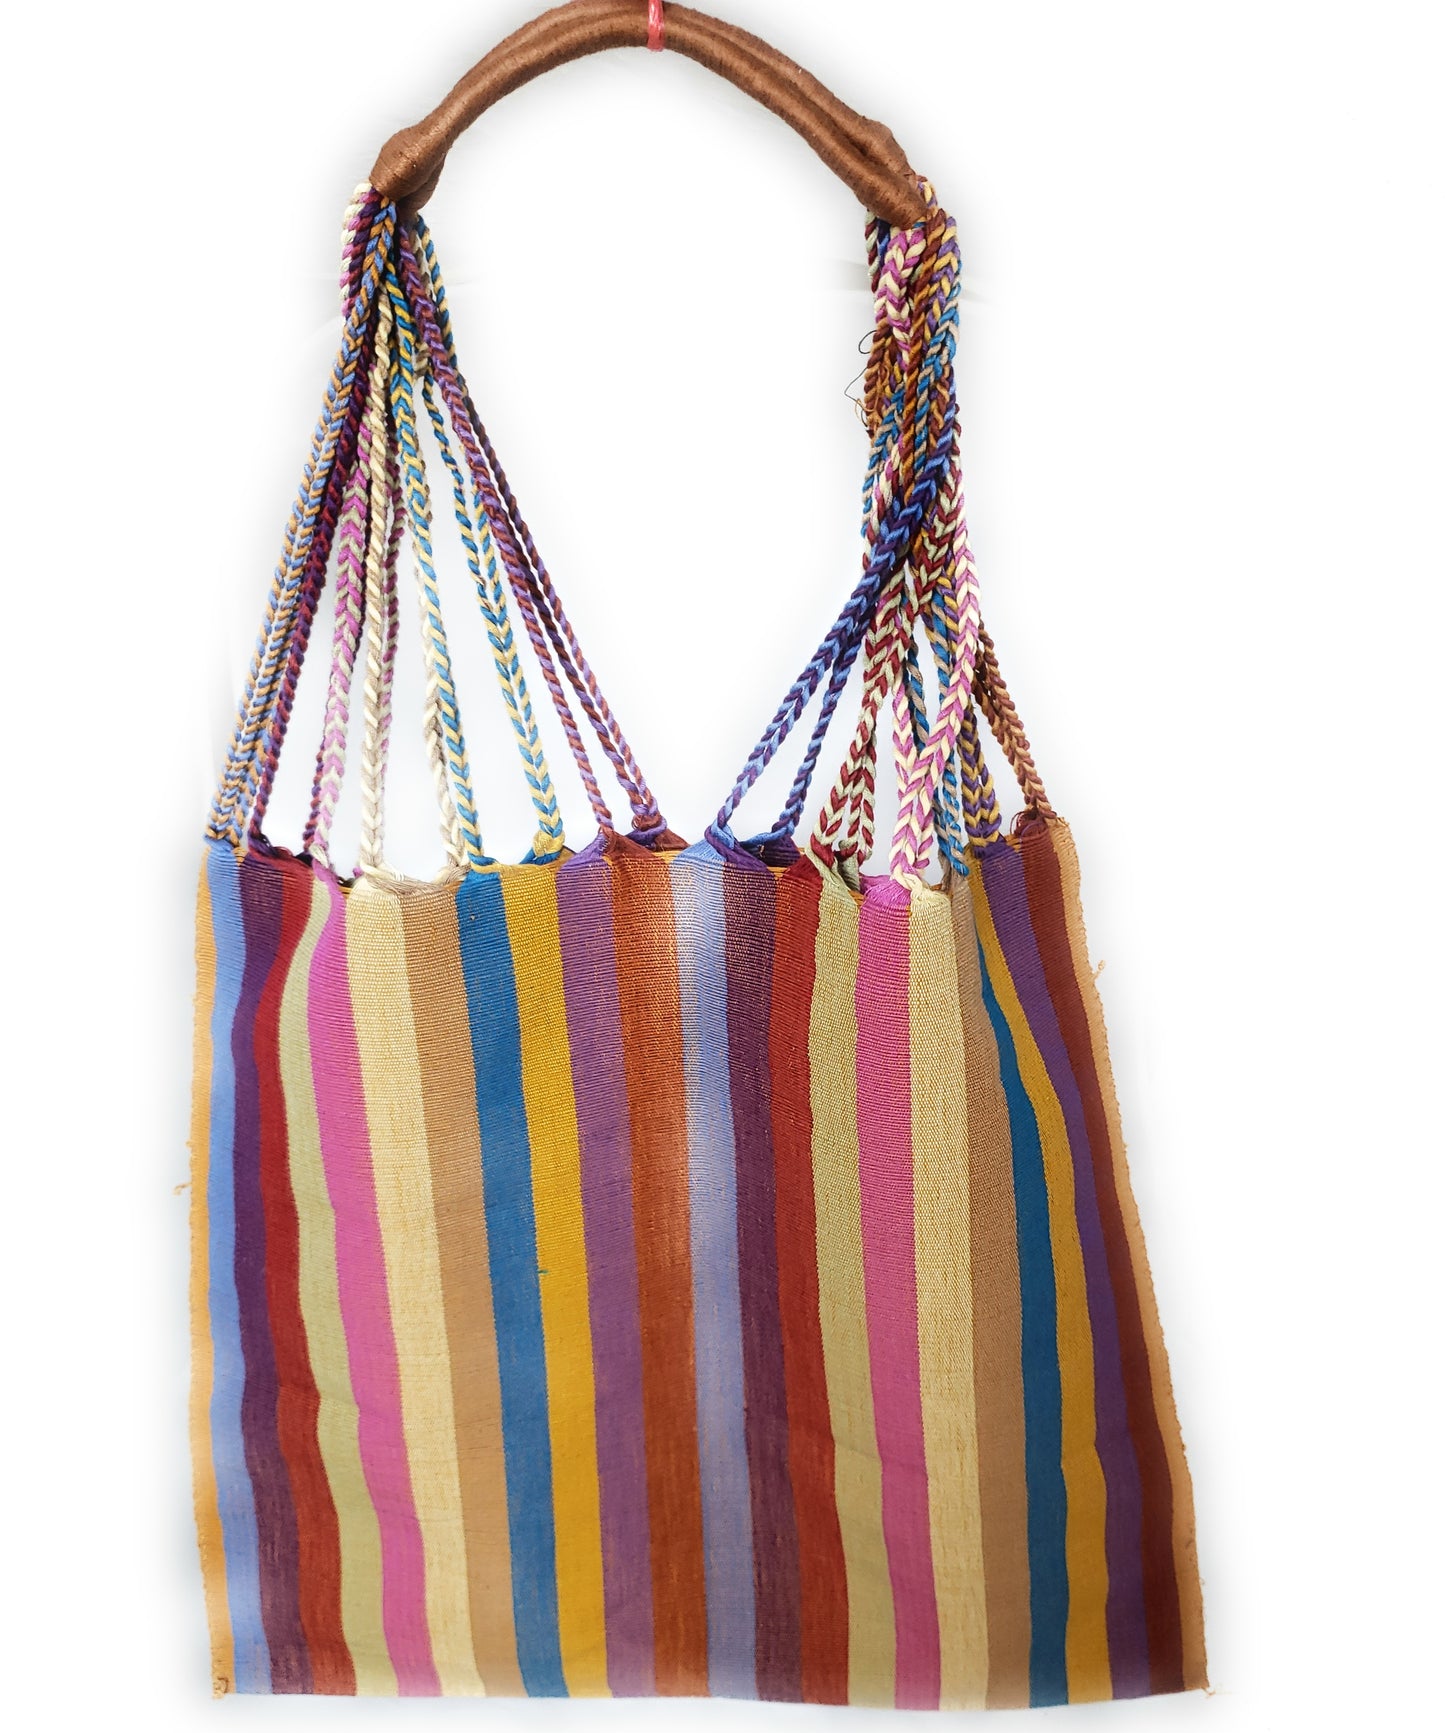 Mexican Striped Woven Tote Bag Women's Handmade